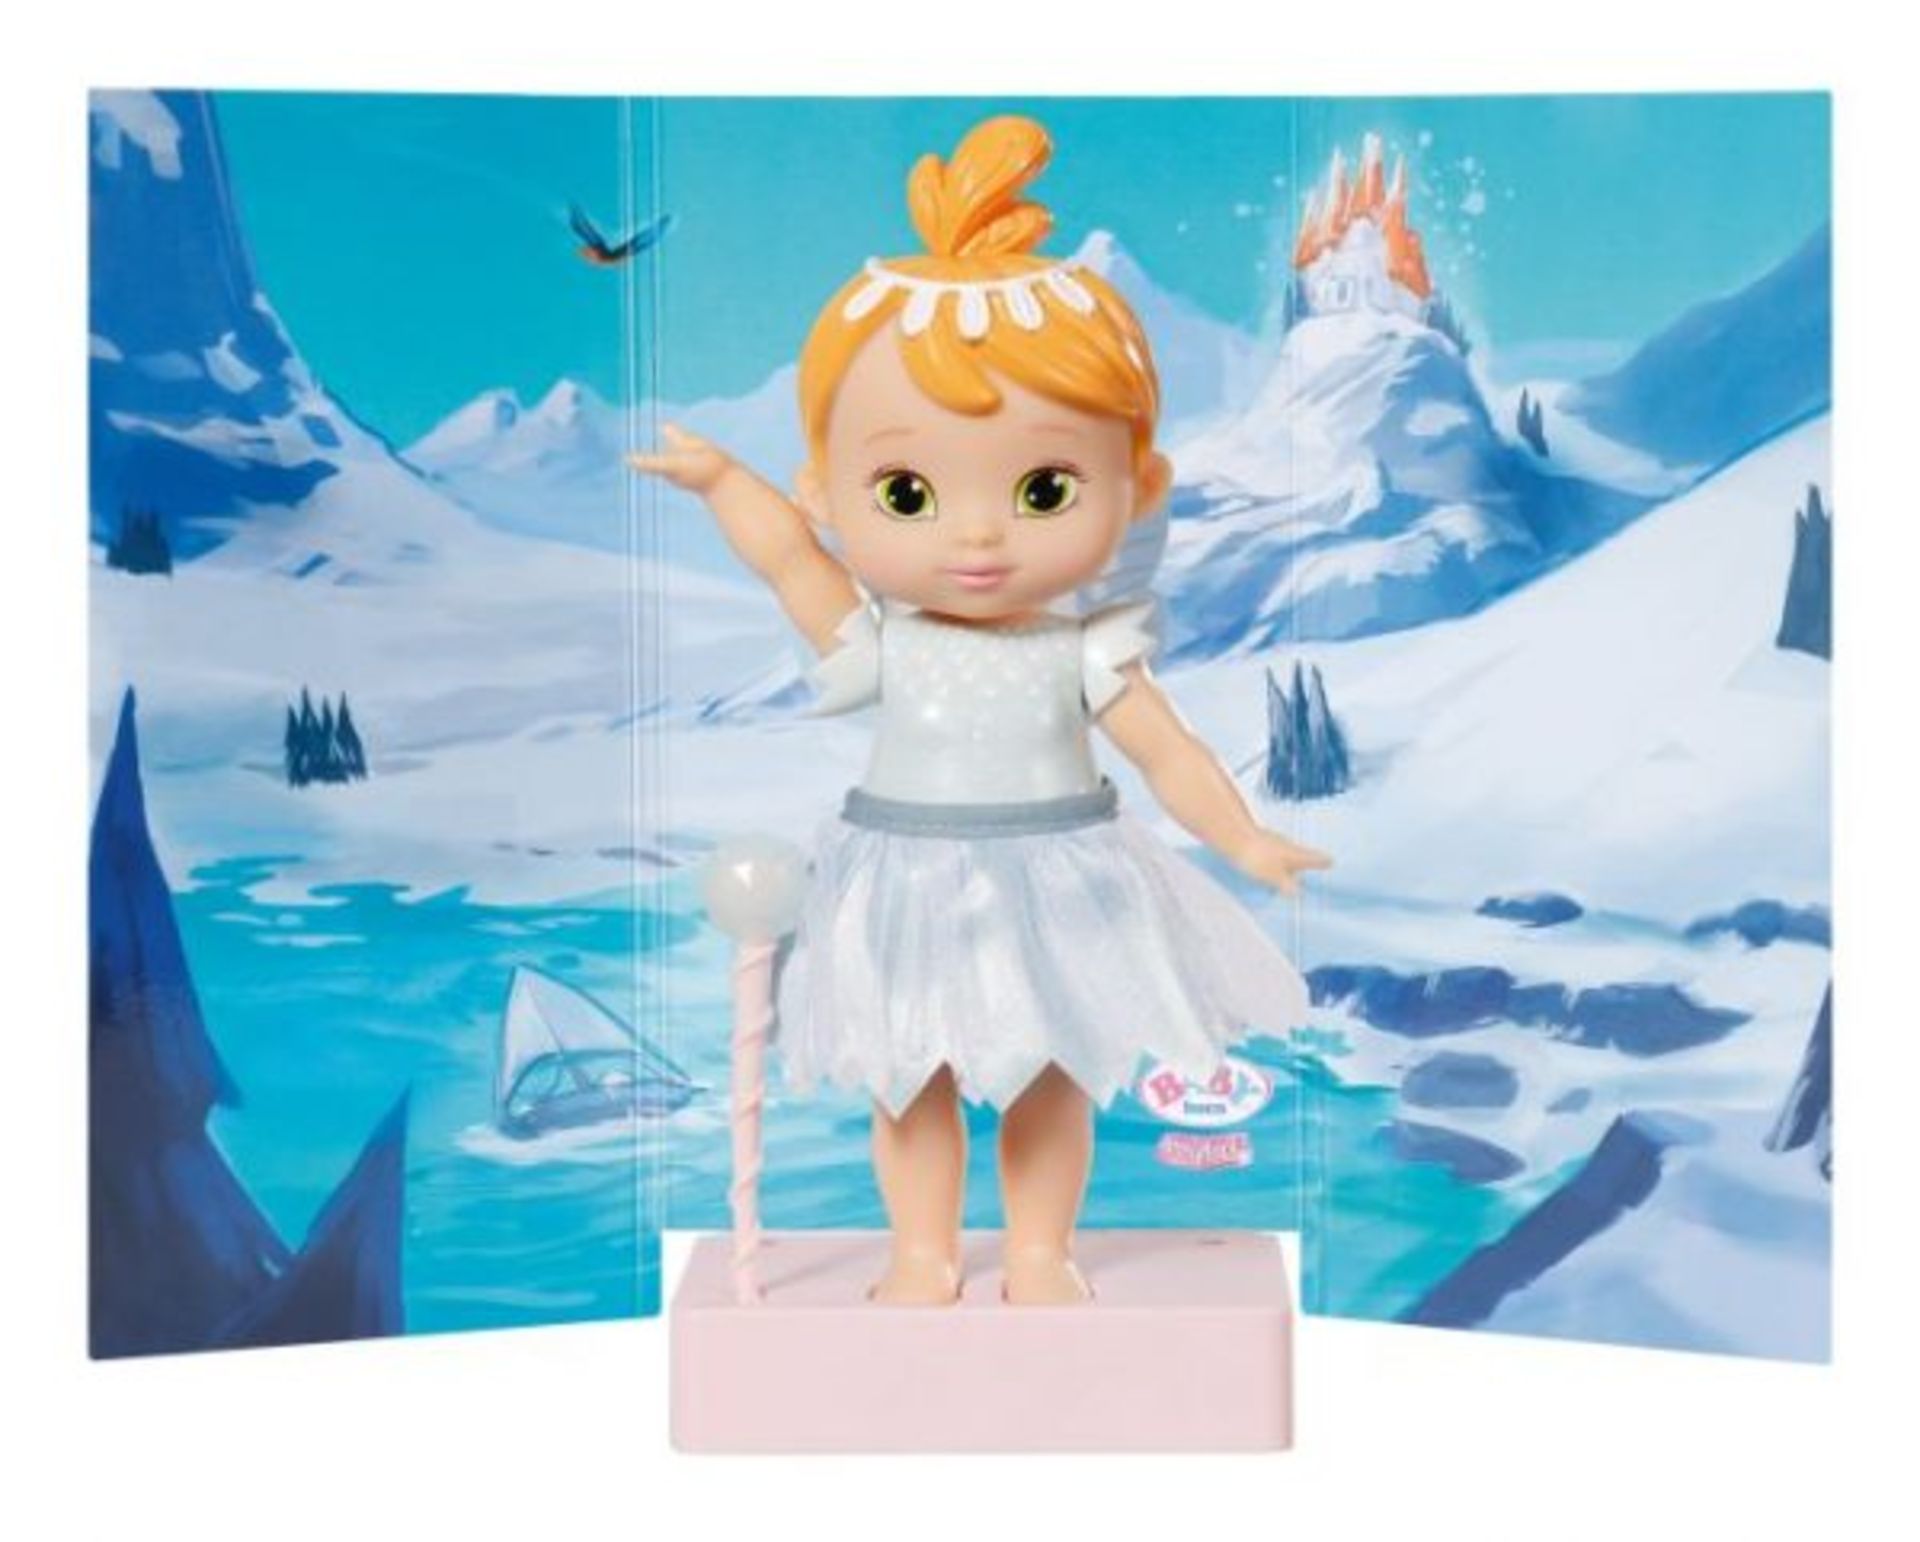 Baby born fairy ice story book set (Delivery Band A)